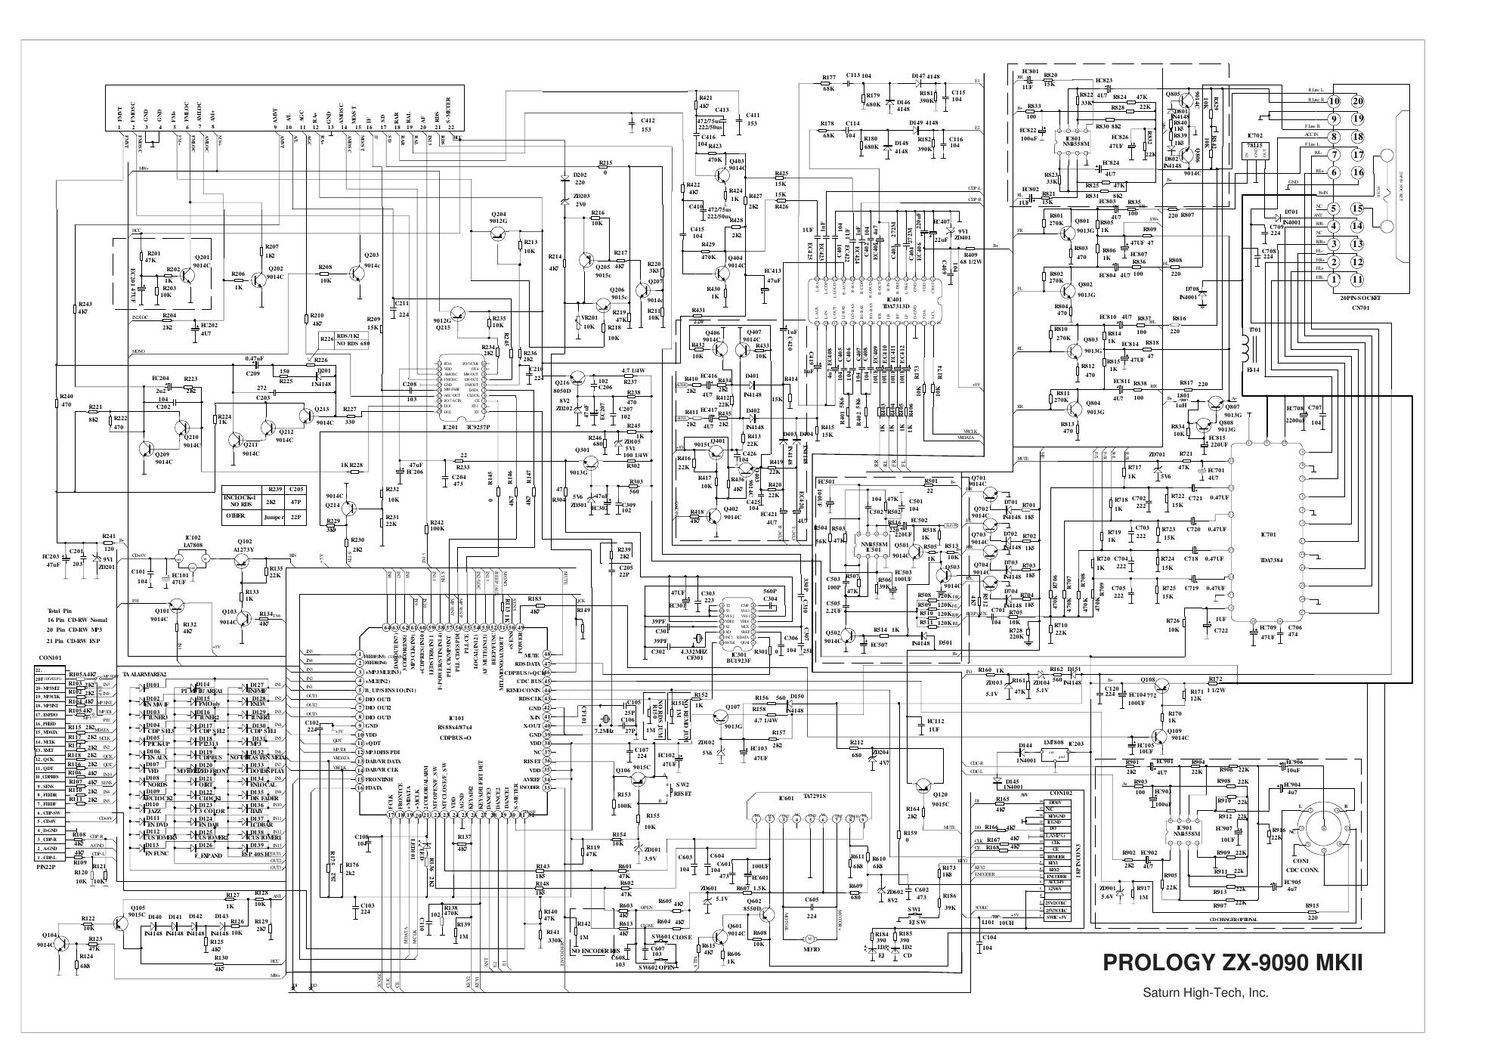 Free Audio Service Manuals - Free download prology zx 9090 mk2 schematic